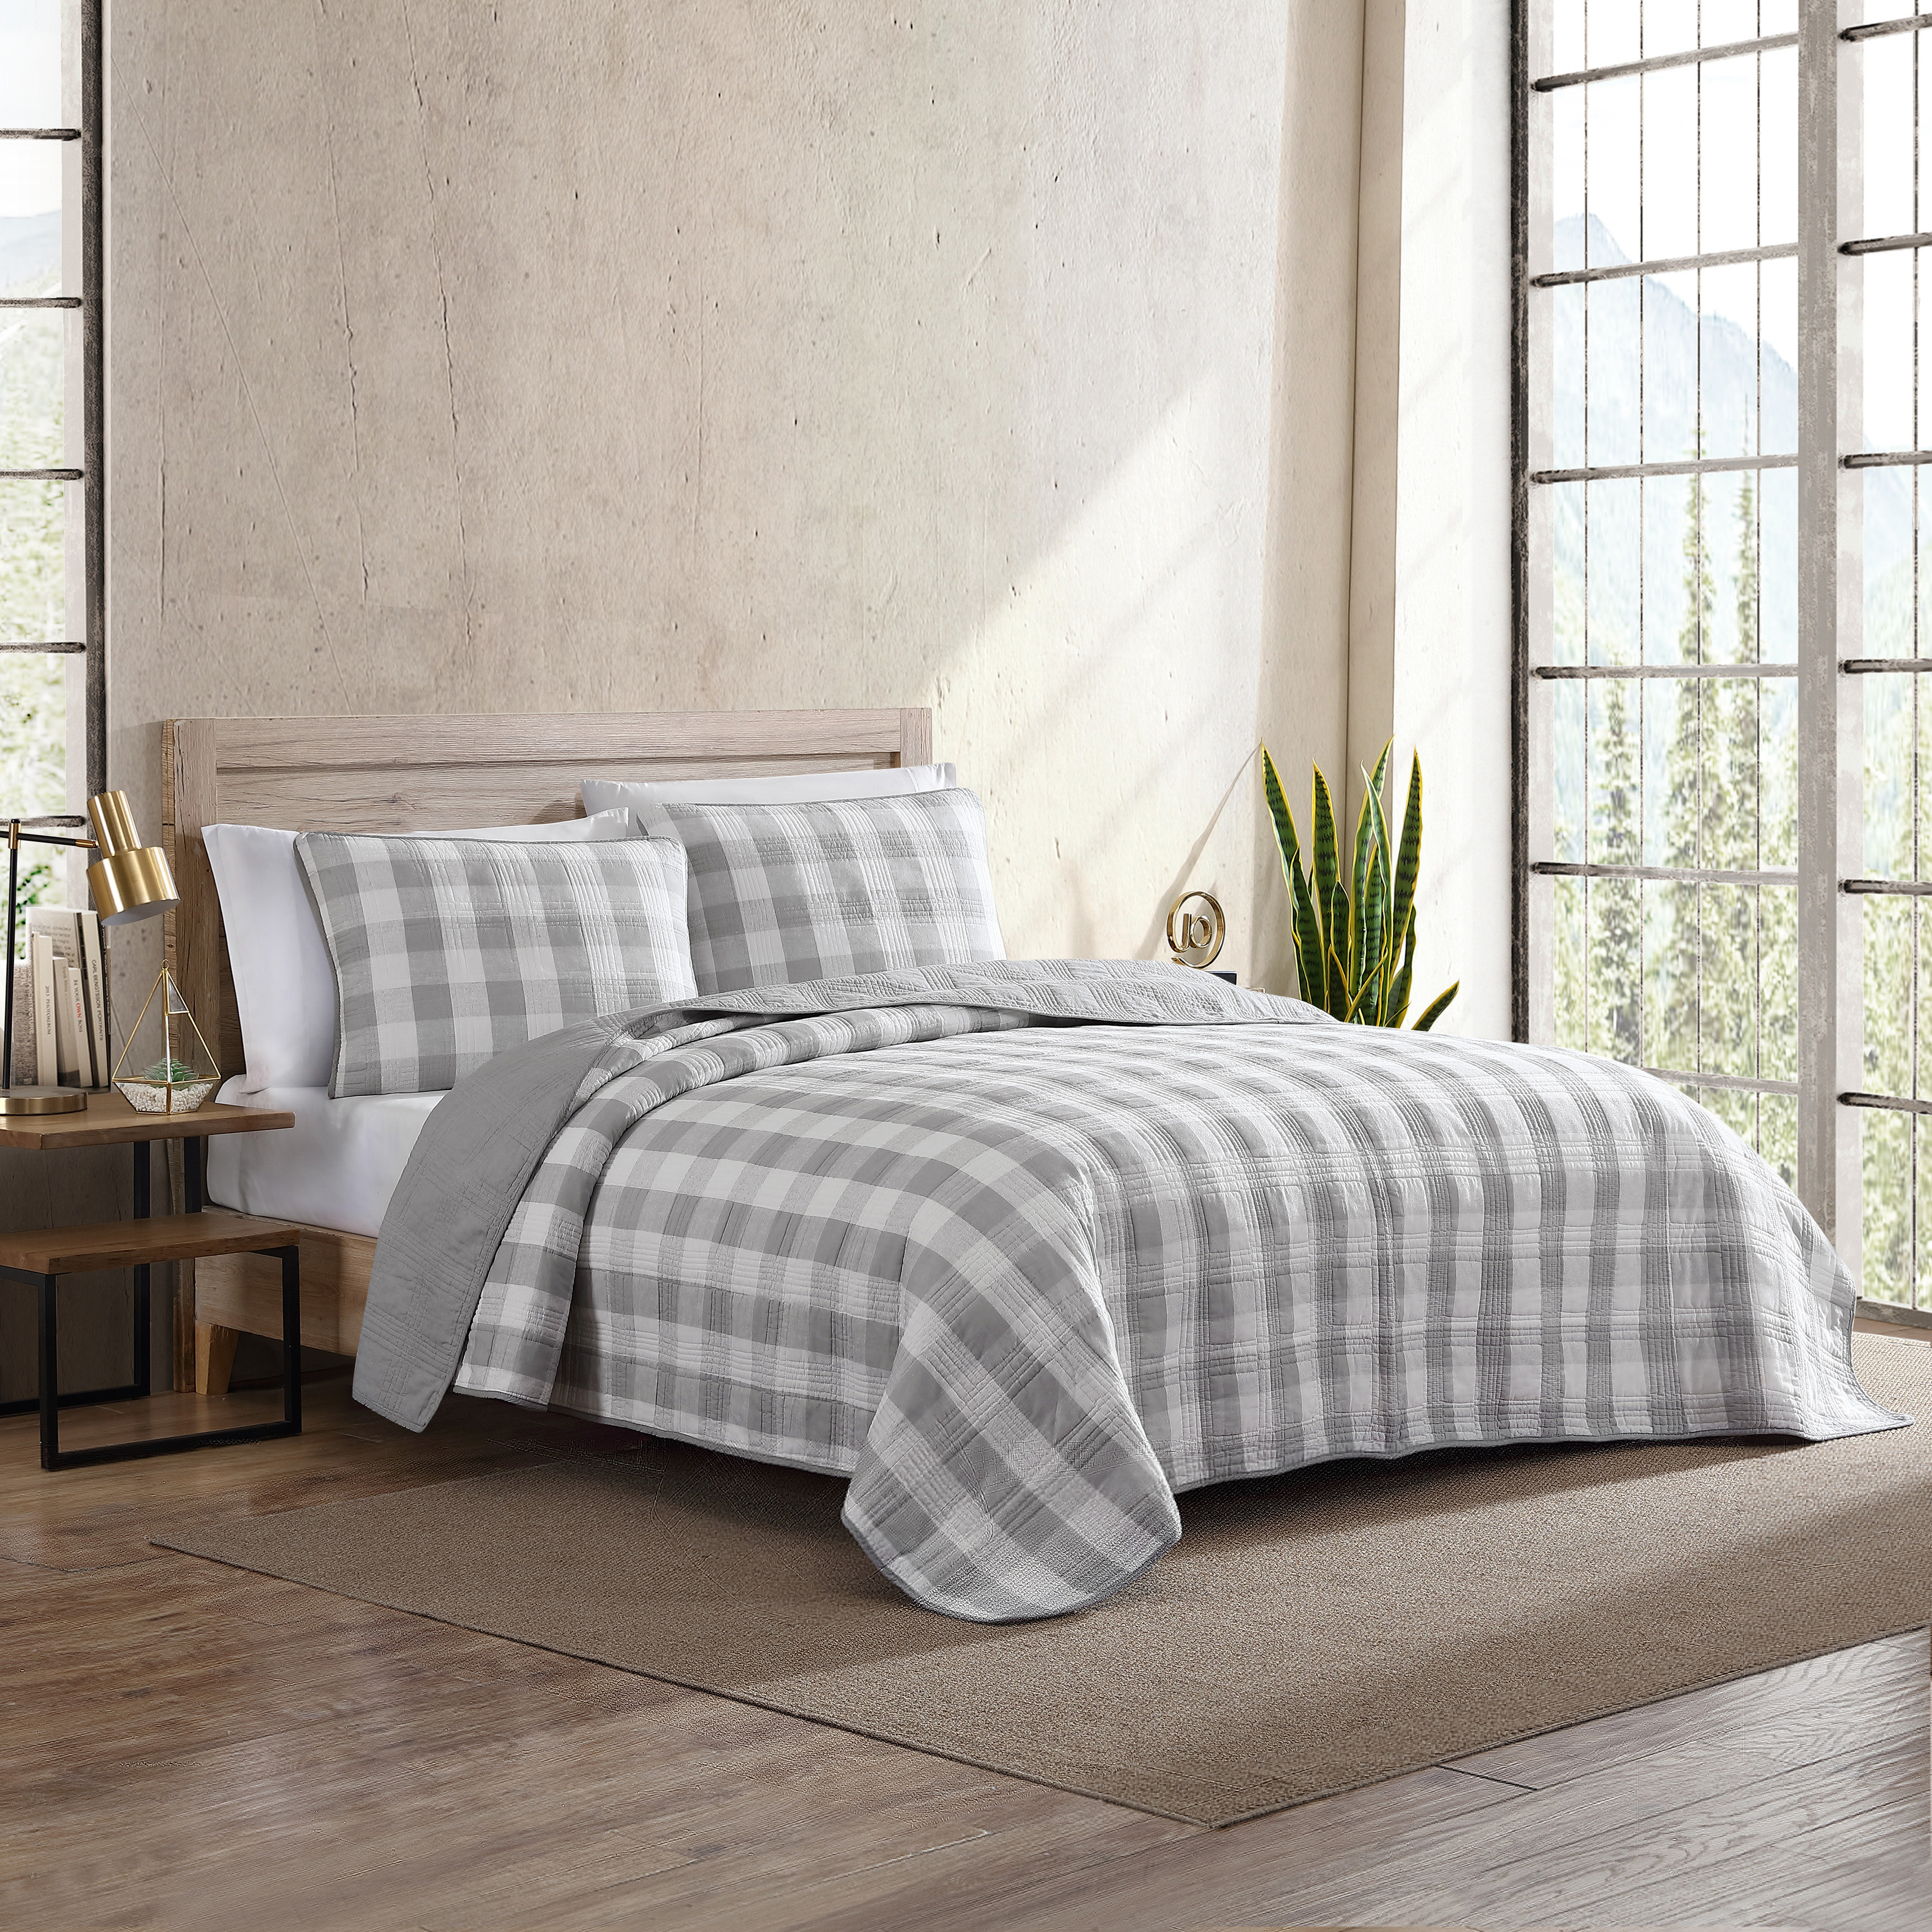 Bee & Willow Chambray Strip Duvet Cover Set 3 Pc